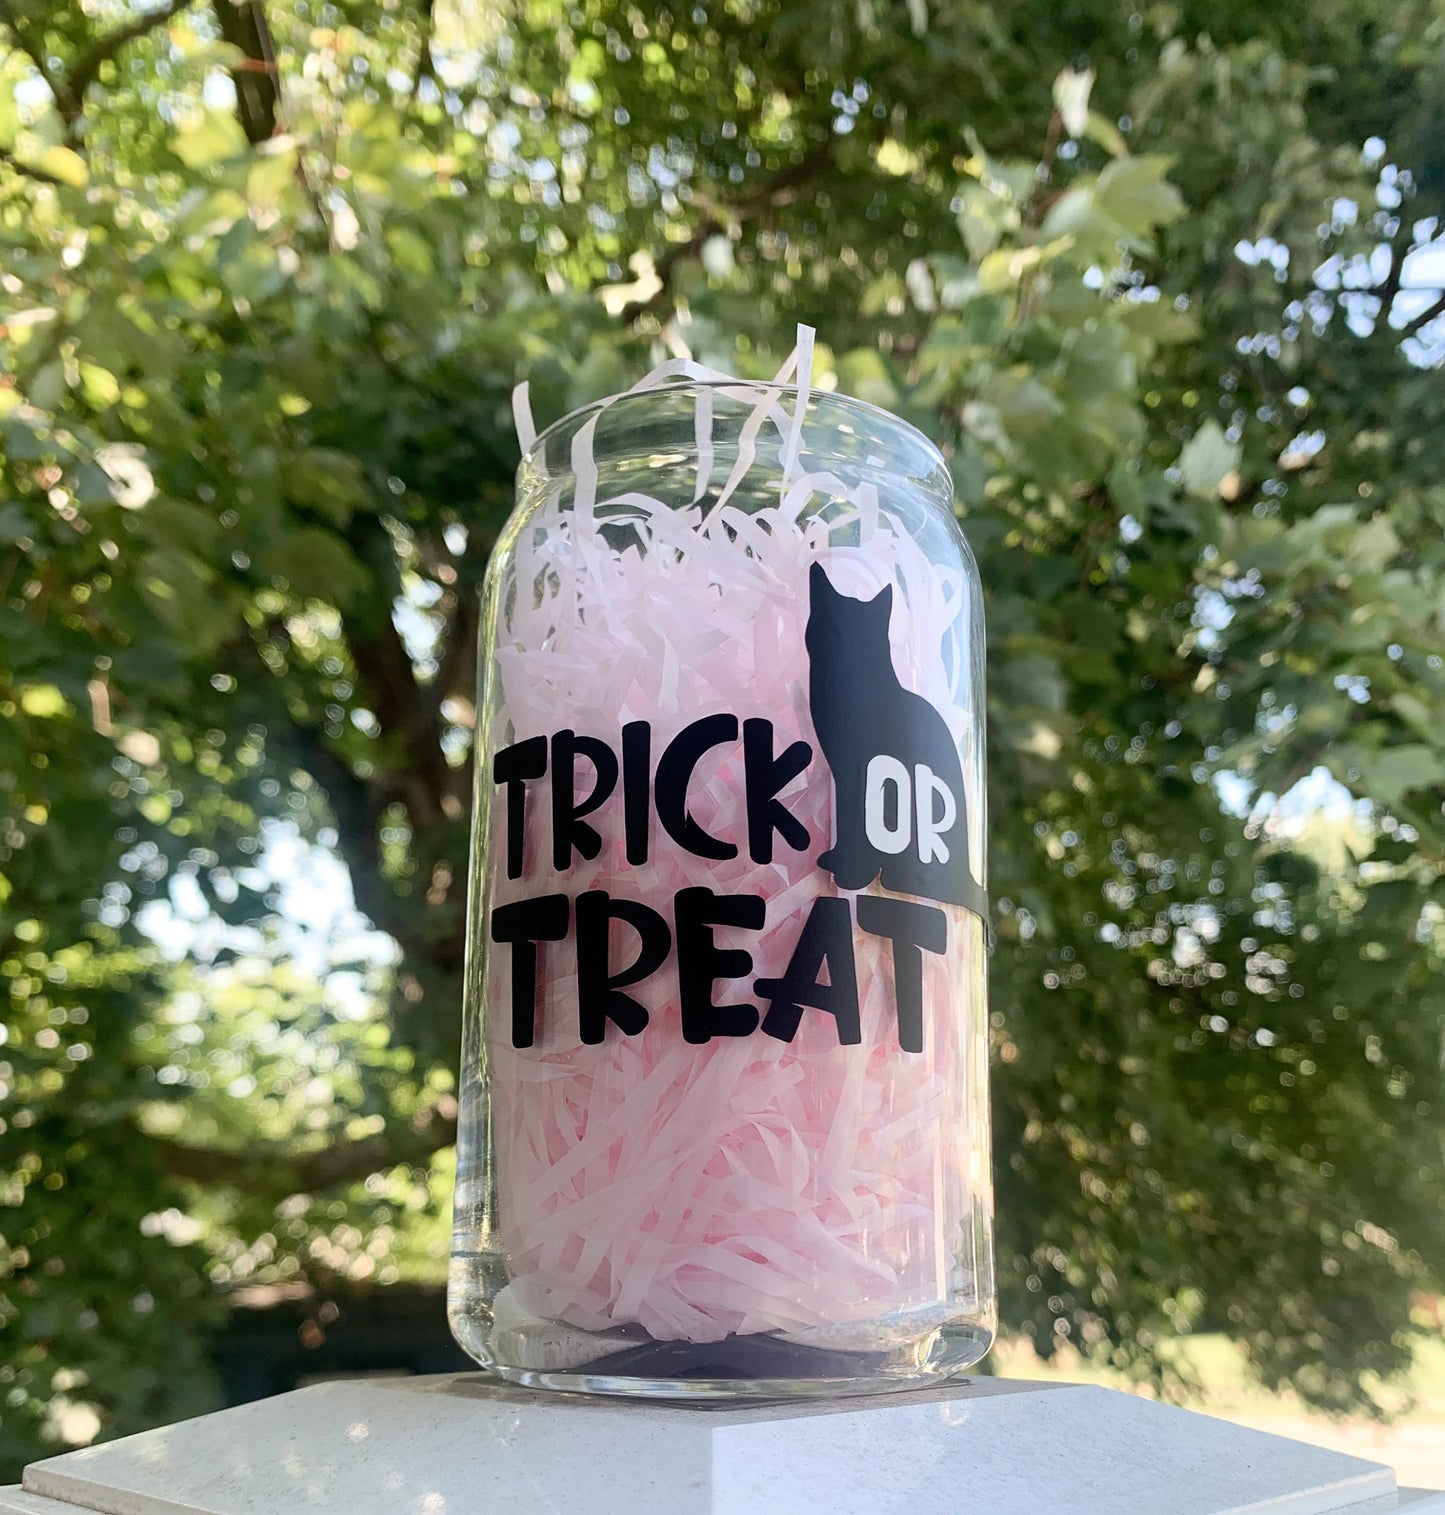 The same spooky cup from a low angle.